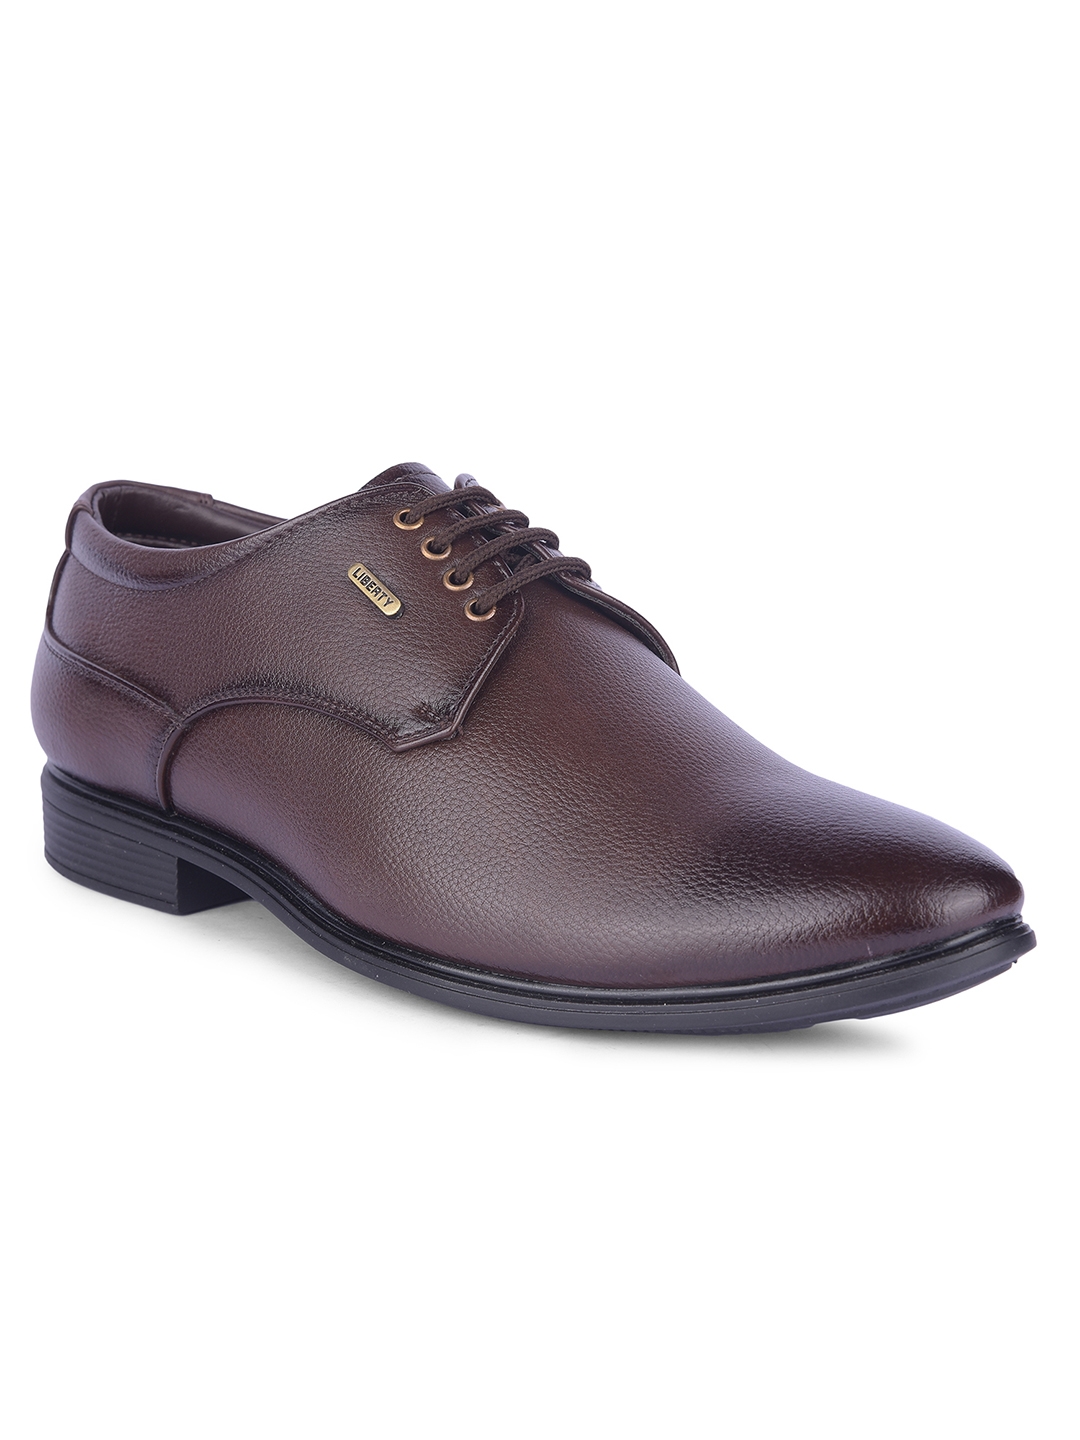 Liberty Fortune Hil-5 Mens Brown Formal Shoes